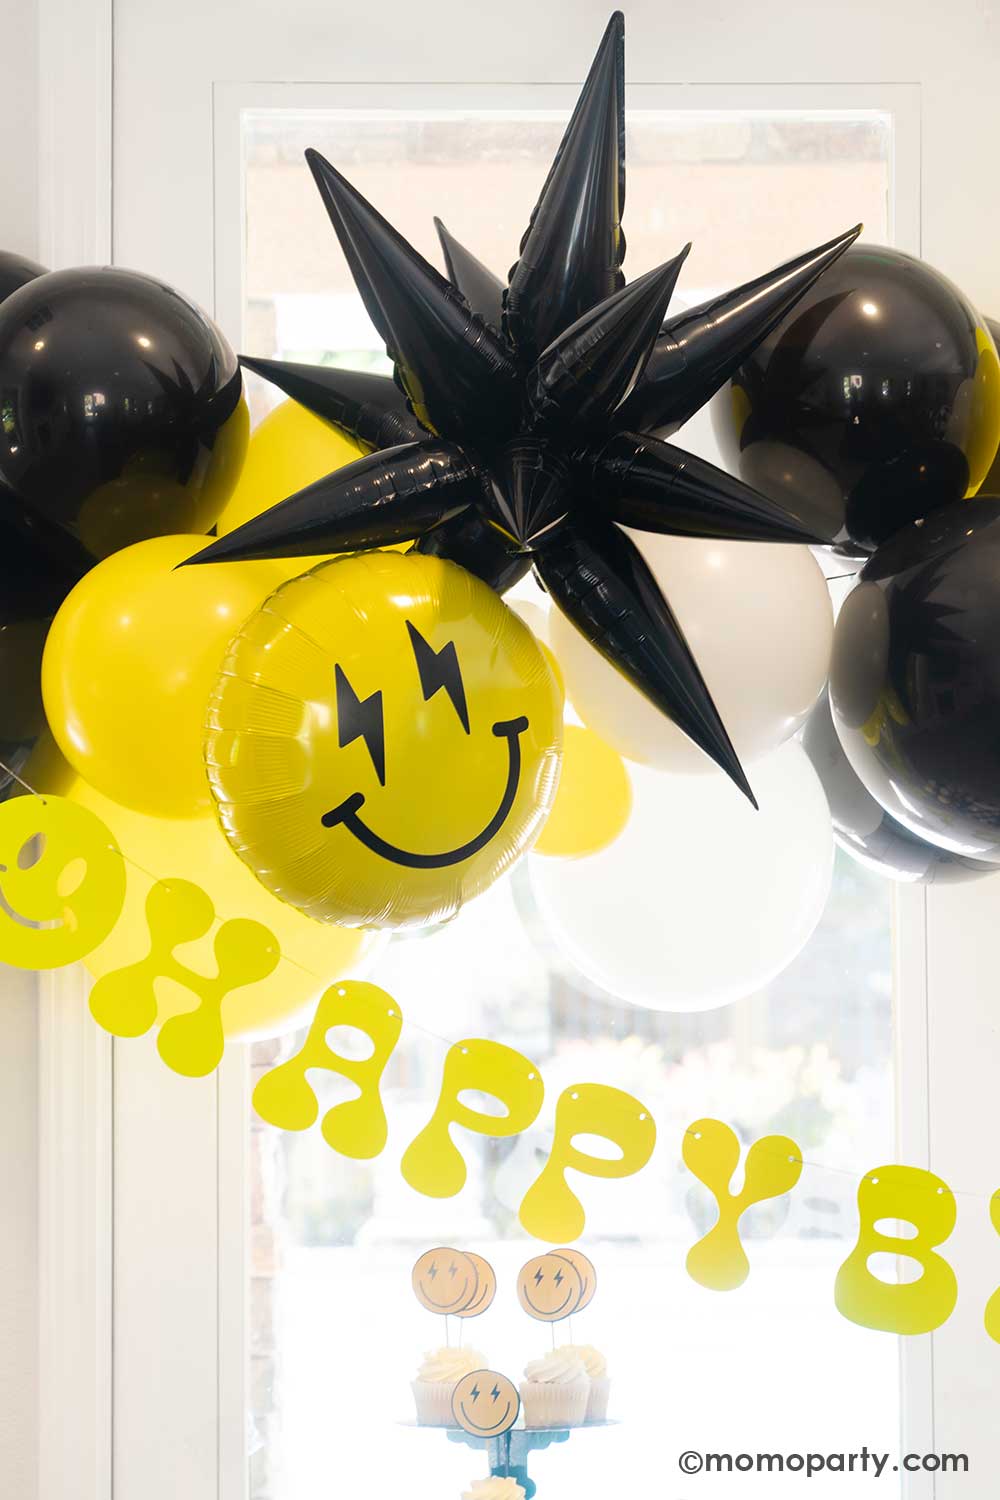 Kid's "Cool Dude" themed Party Balloon Garland decoration by Momo Party featuring retro neon happy birthday banner with a balloon garlands in black, white and yellow adorned with a black starburst foil balloon and smiley fact foil balloon with lightning bolt eyes. This decoration is perfect for boy's "One Happy Dude" themed first birthday, a "Two Cool" themed second birthday party or "Ten Rad Years" 10th birthday party.